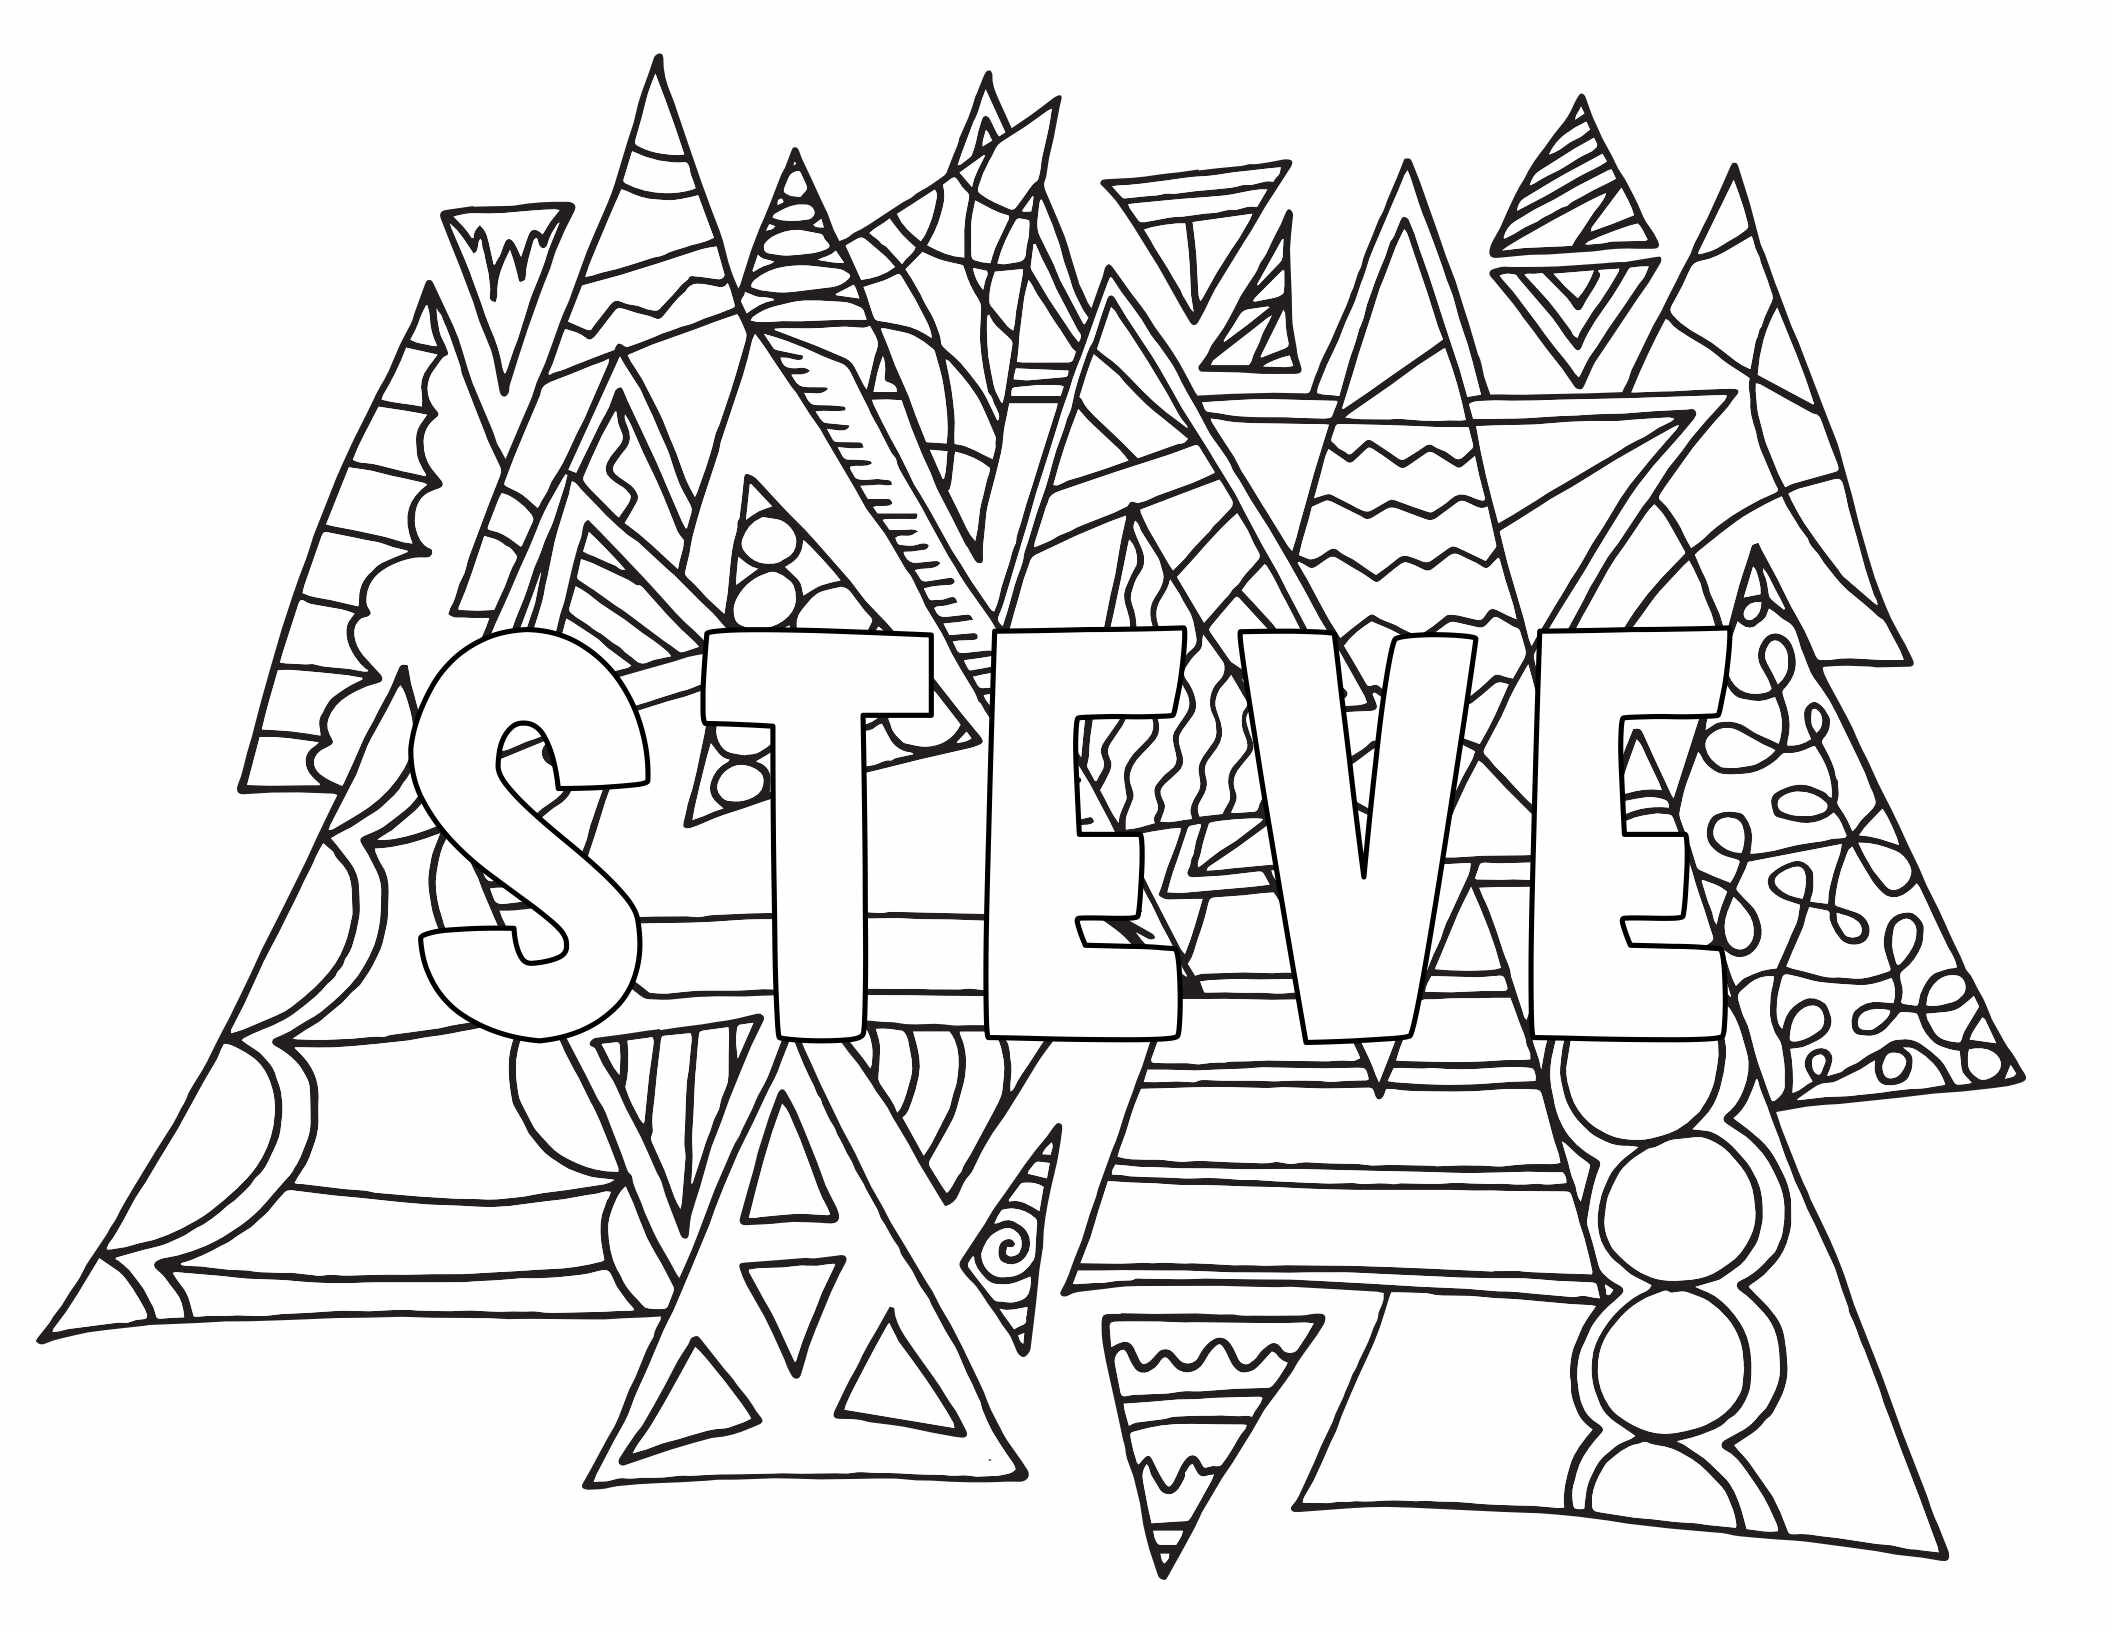 Two FREE STEVE Printable Coloring Pages From Stevie Doodles CLICK HERE TO DOWNLOAD THE PAGE SHOWN ABOVE